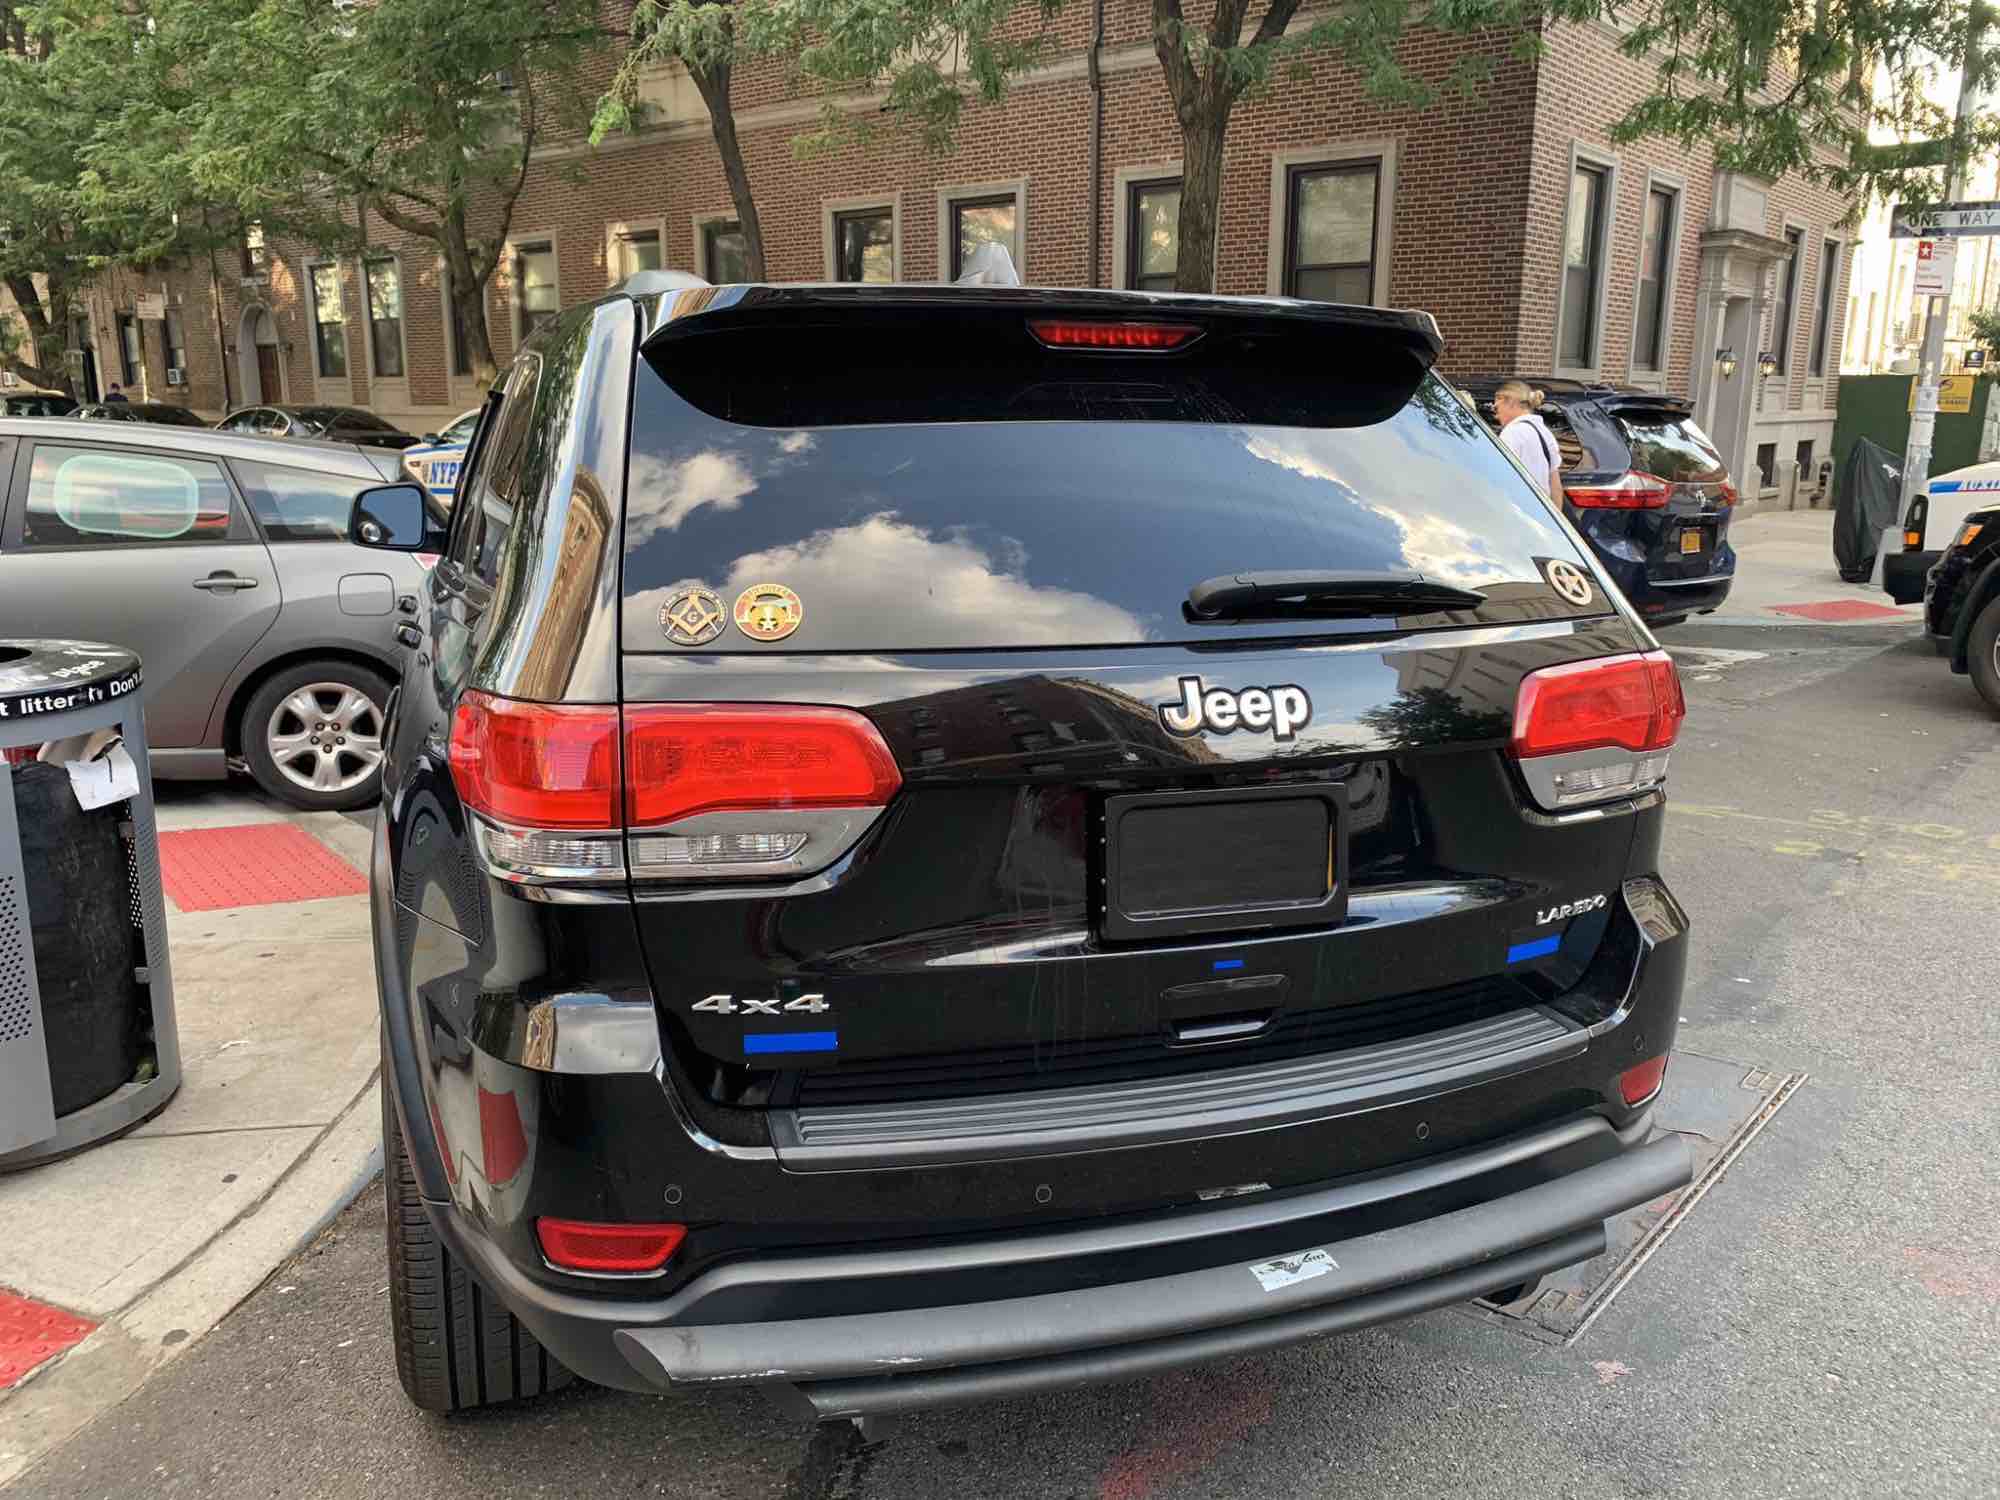 A black Jeep with an illegal plate obstruction device driven by the Brooklyn director of the Mayor's Community Affairs Unit.